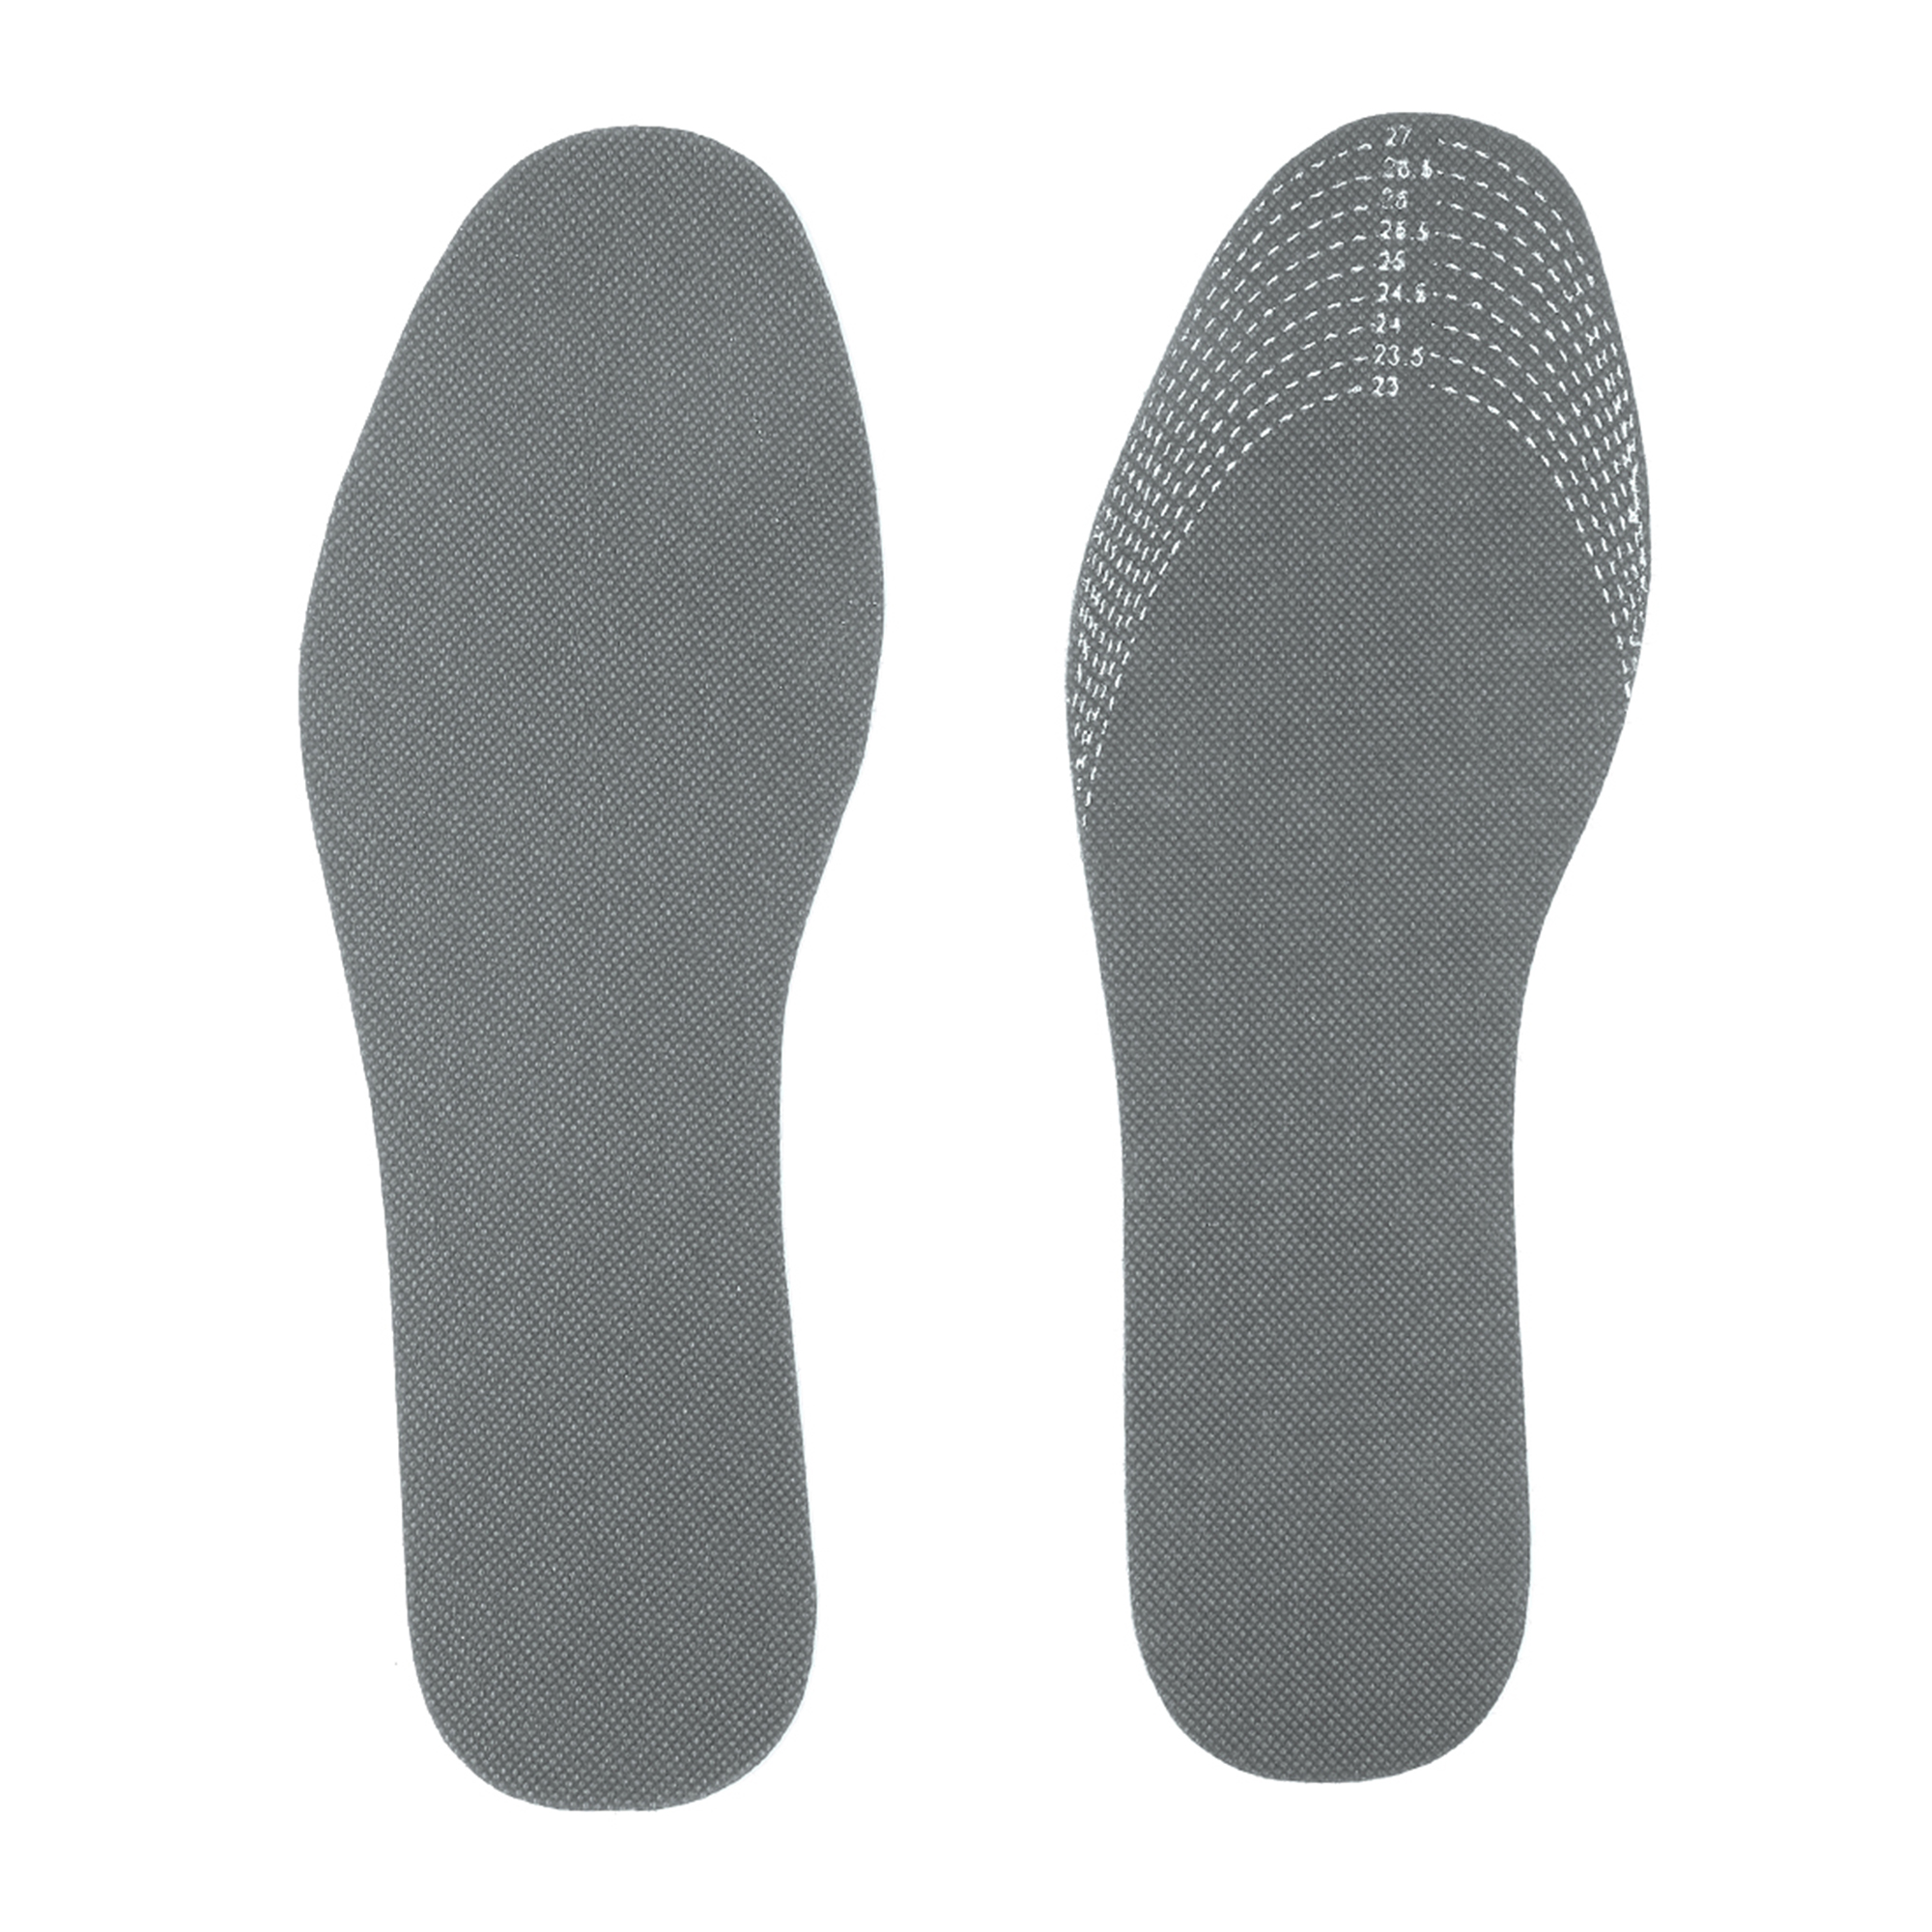 Allegra K Unisex Athletic Damping Absorb Shock Durable Insole for Sport Hiking - image 4 of 4